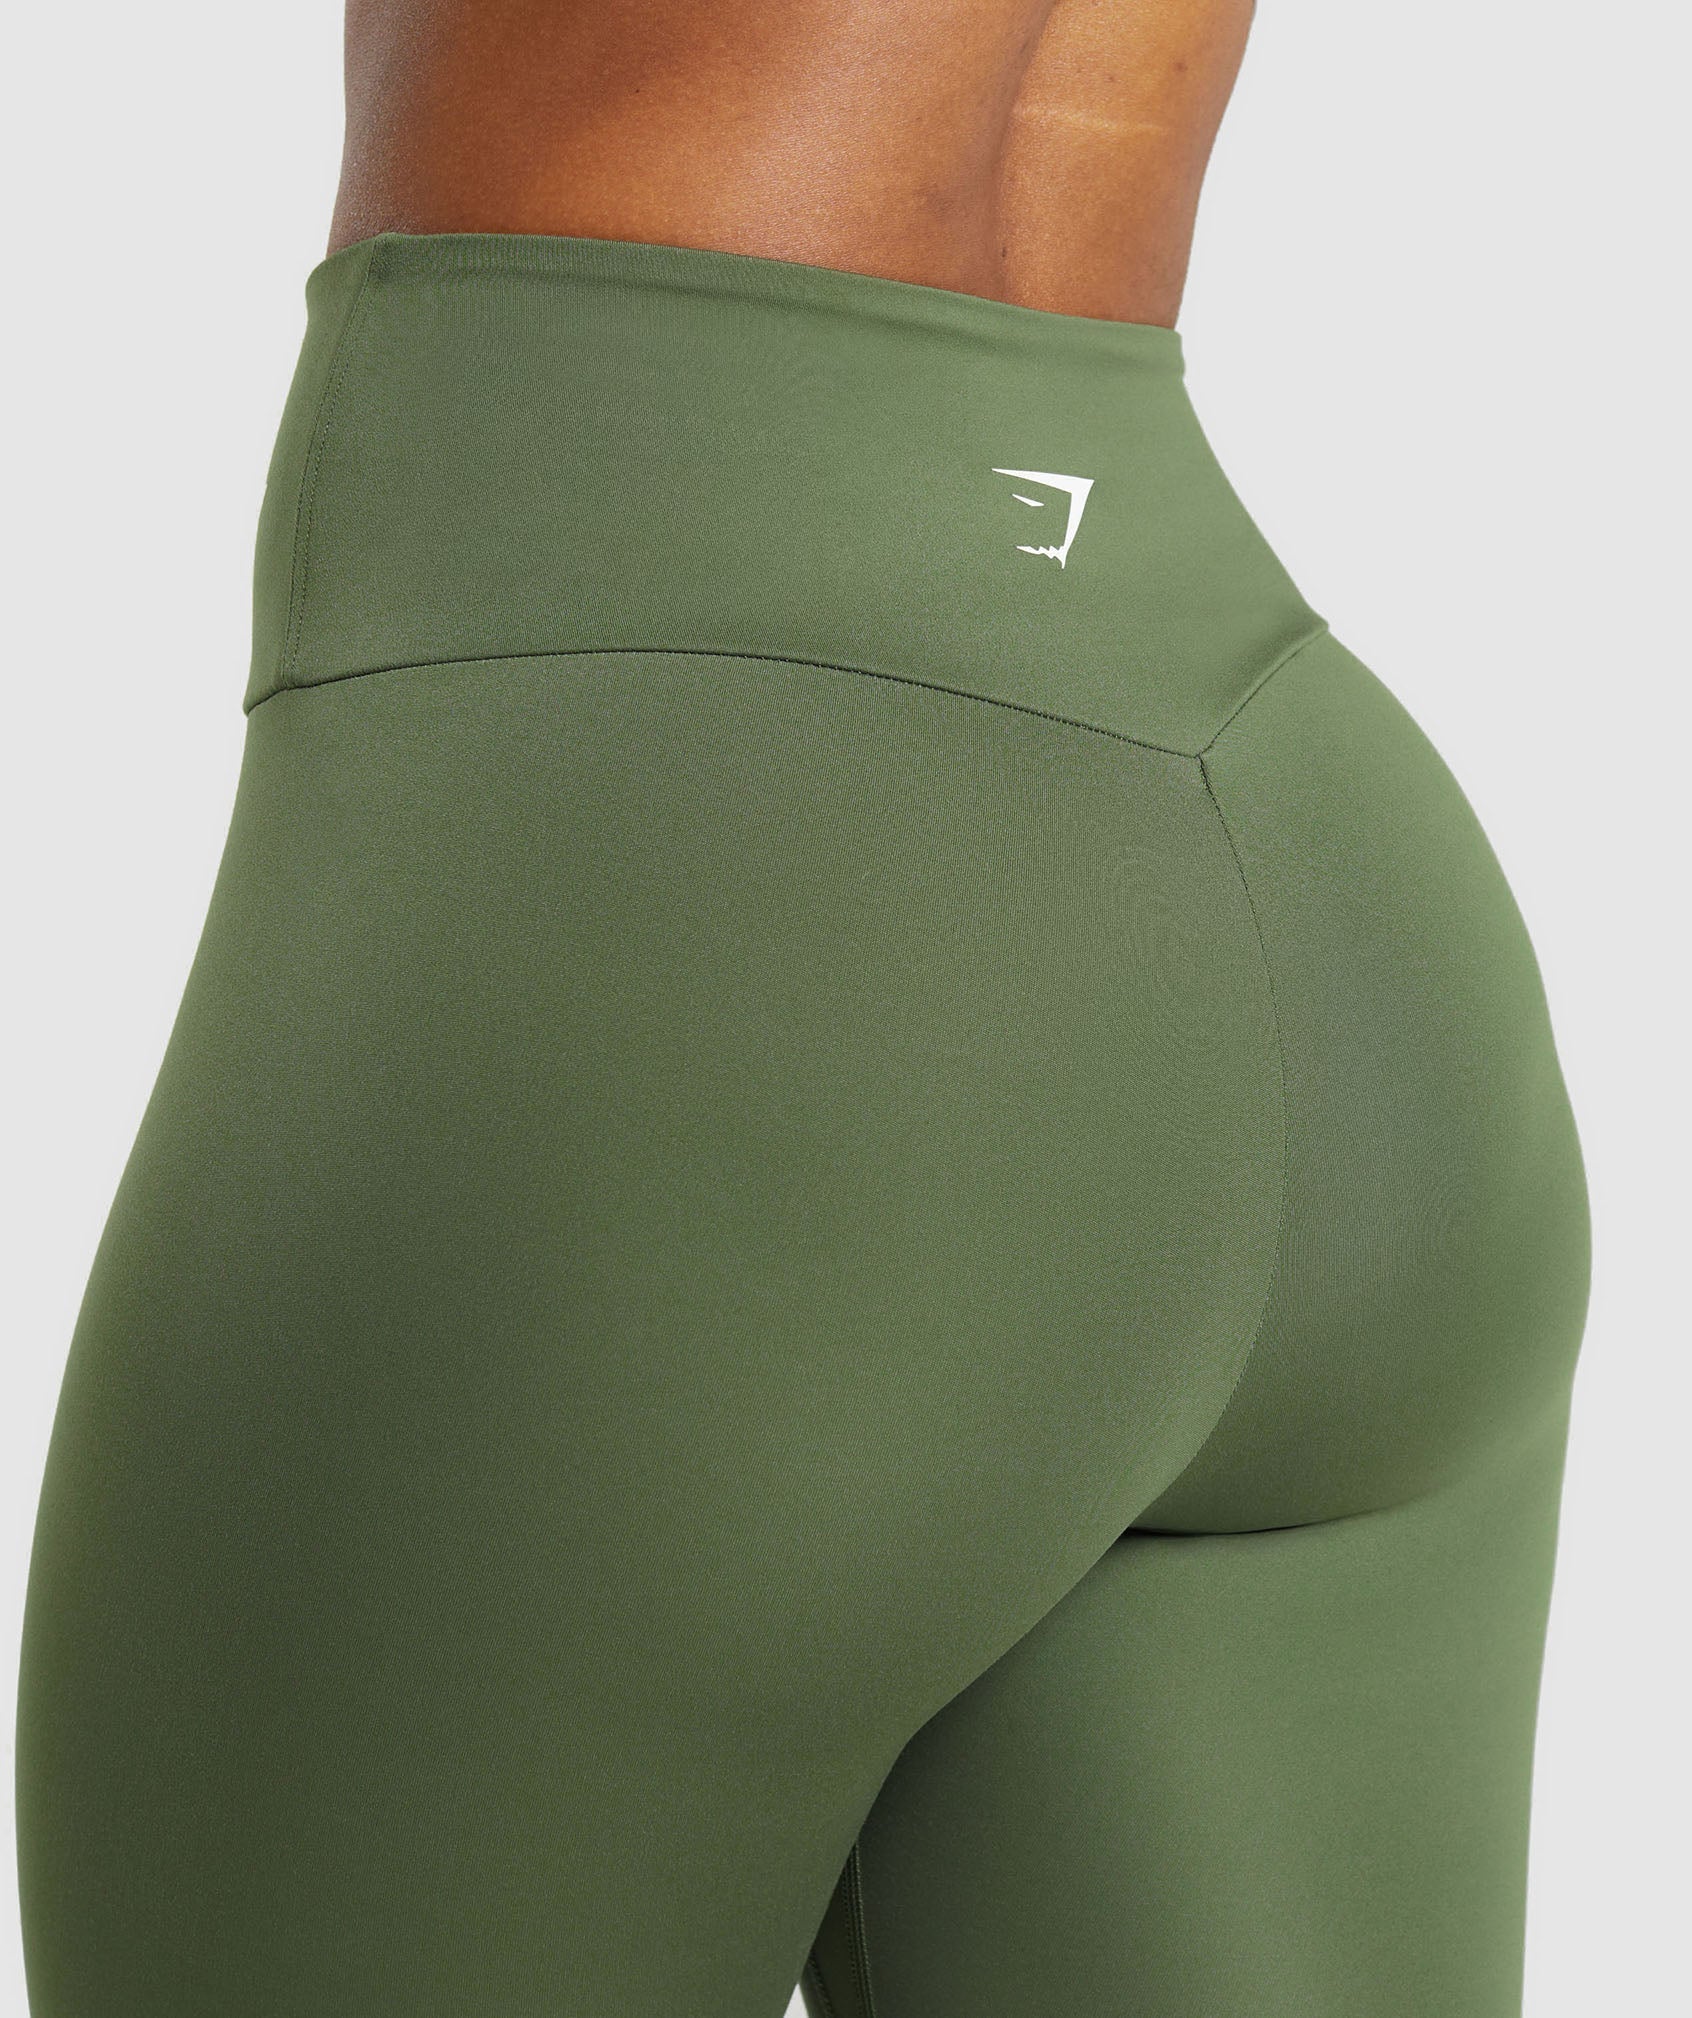 Training Leggings in Core Olive - view 5